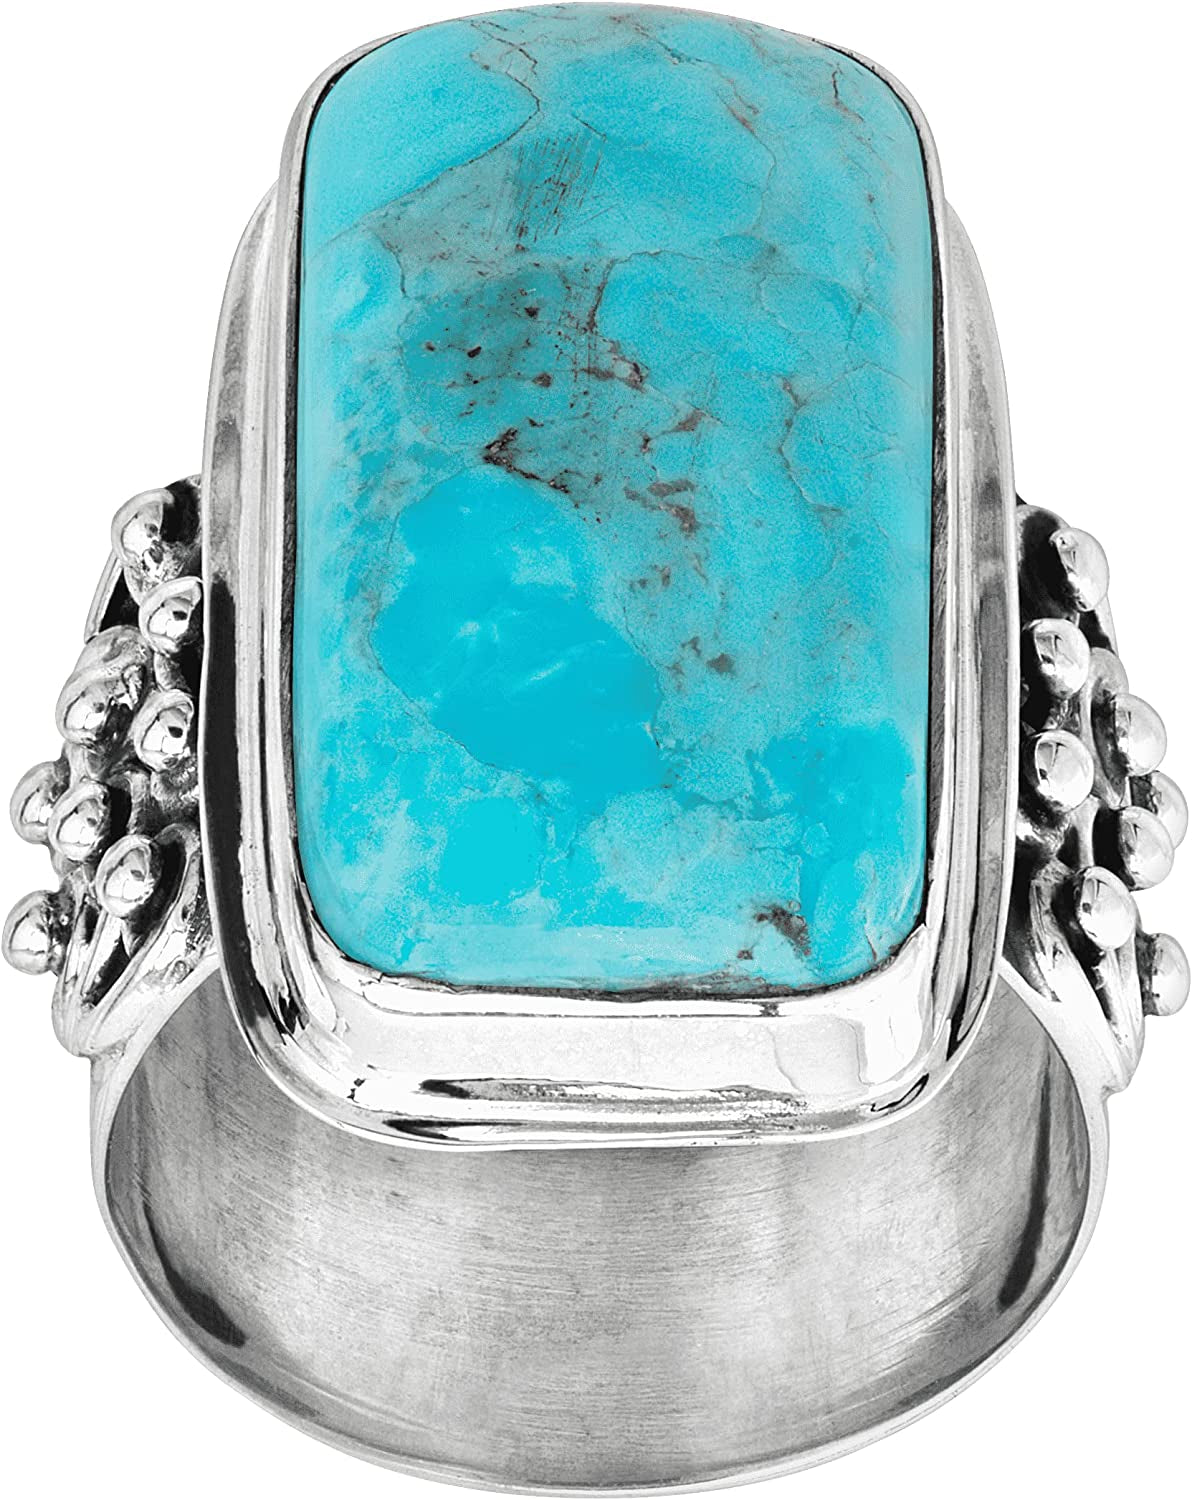 Silpada 'Big Spring' Compressed Mojave Turquoise Statement Ring in Sterling Silver